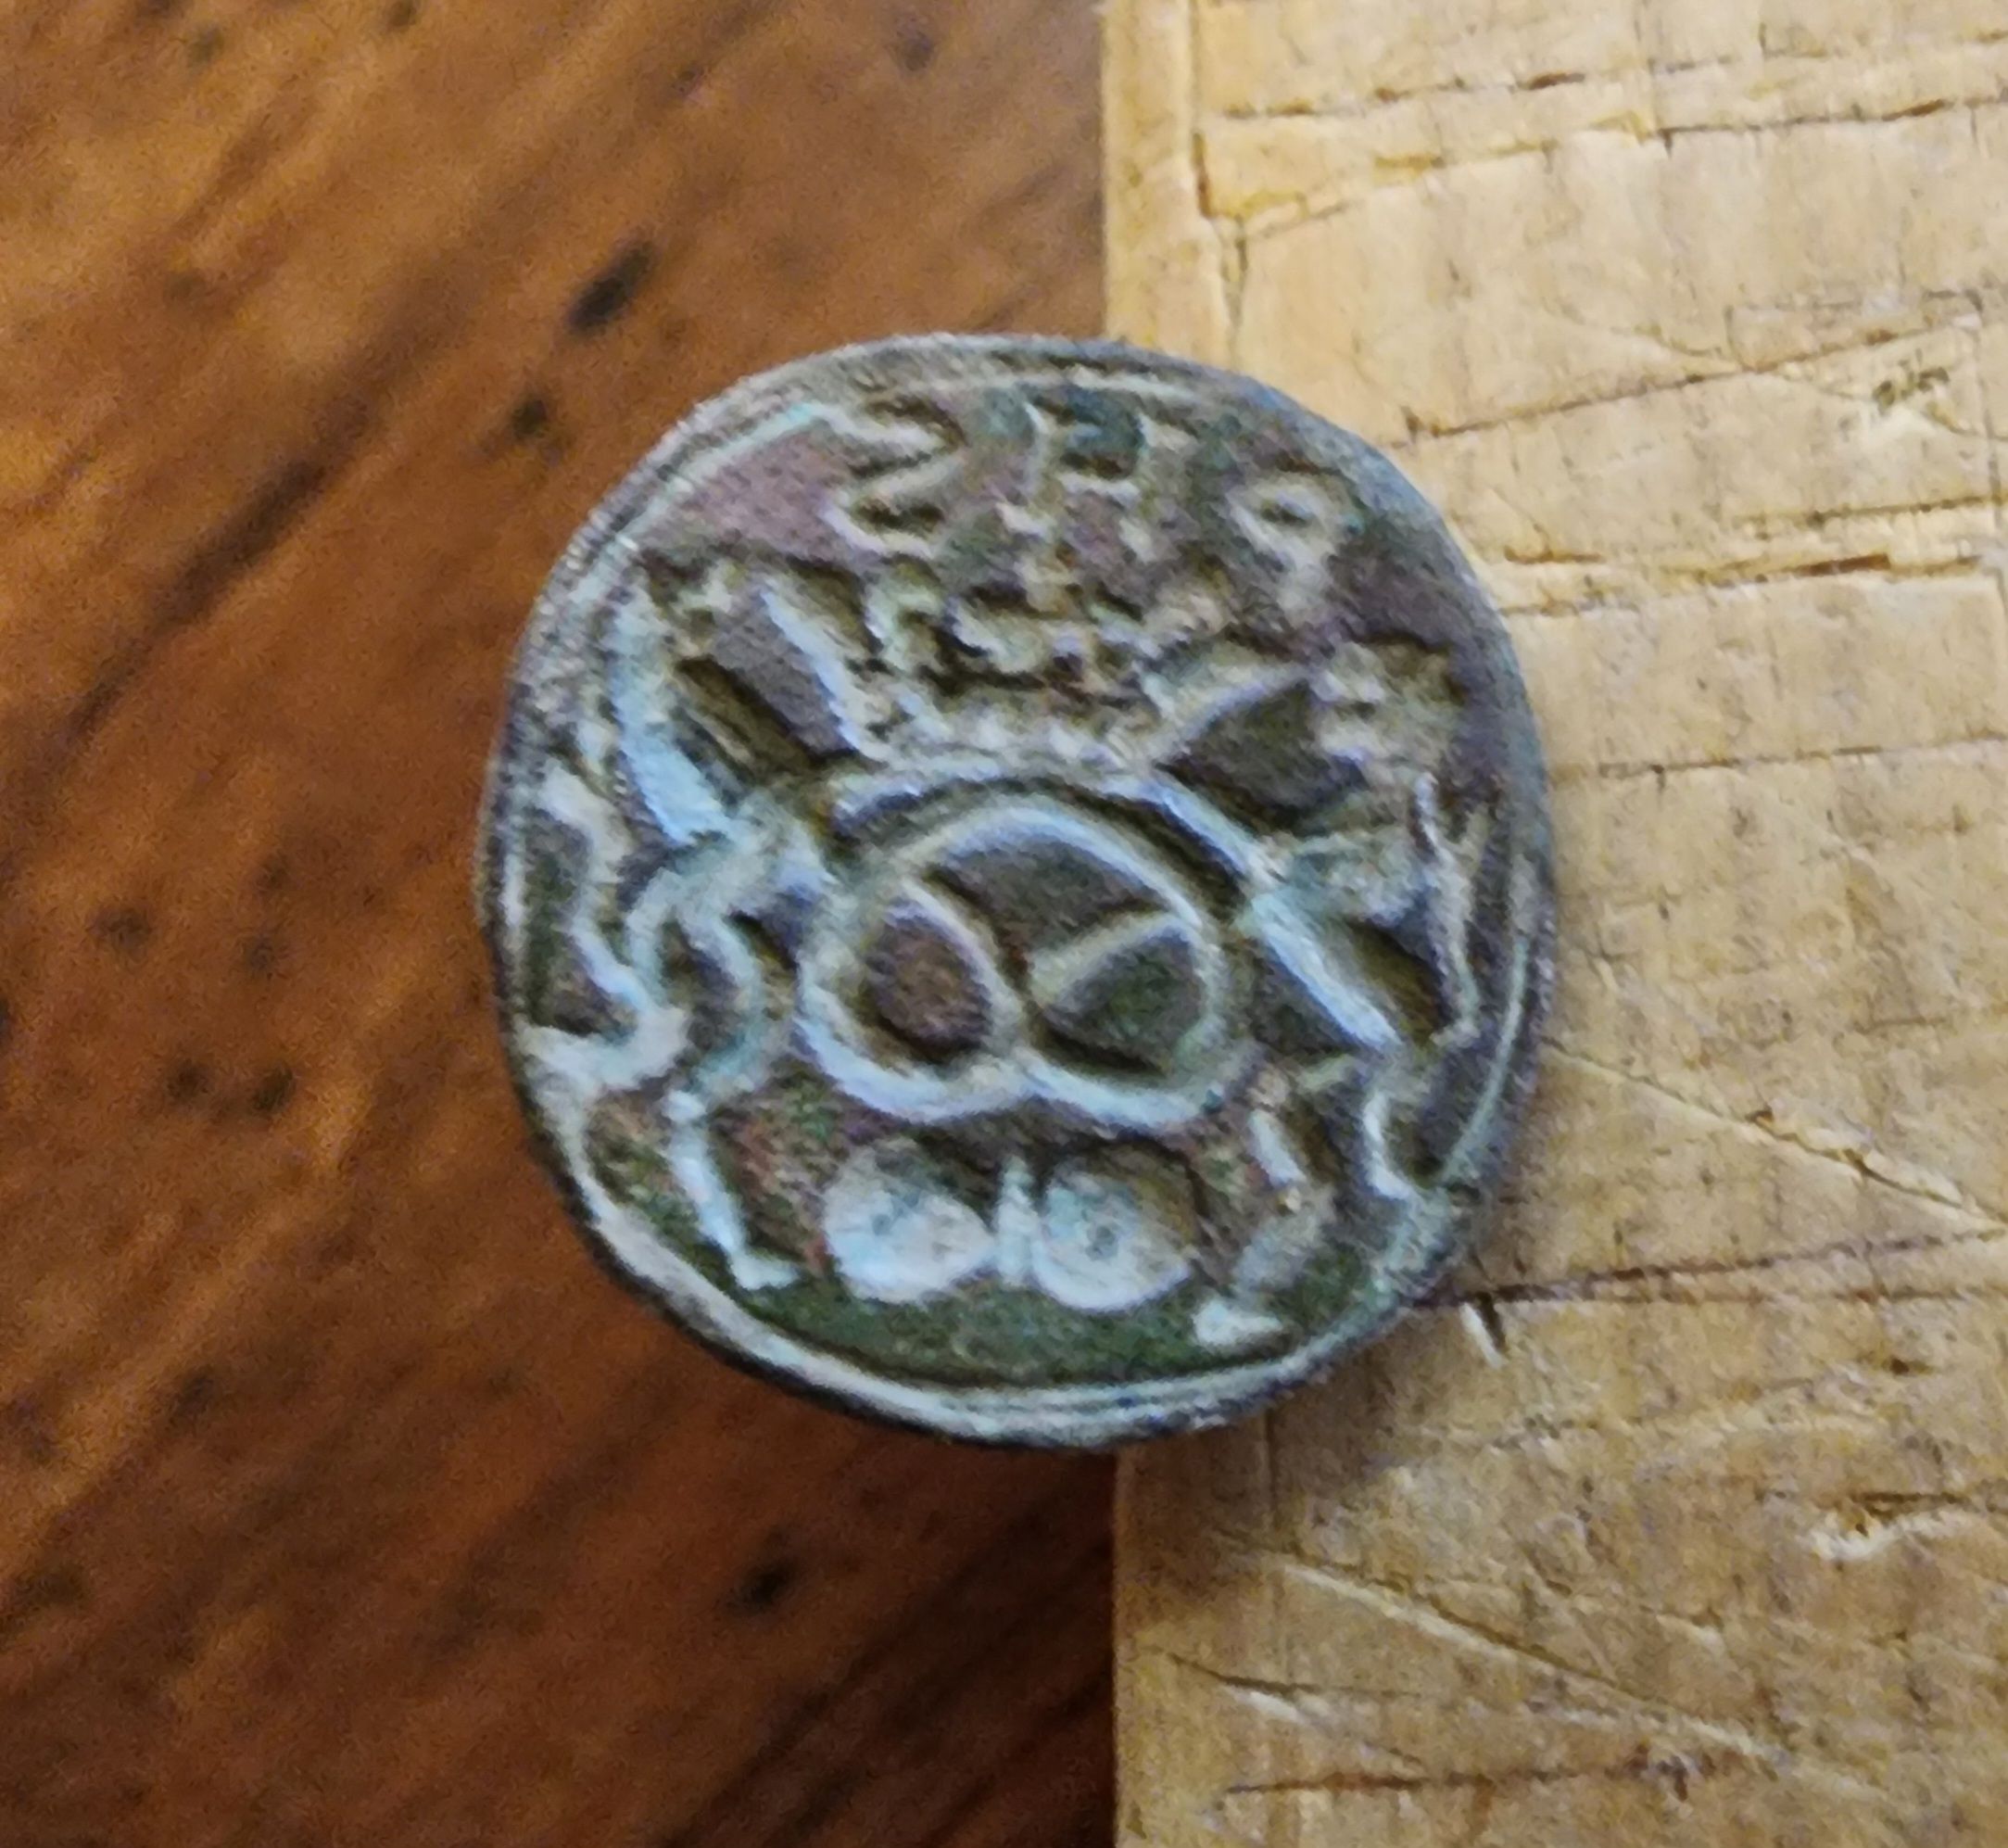 First for me wax seal stamp! Updated with wax impression